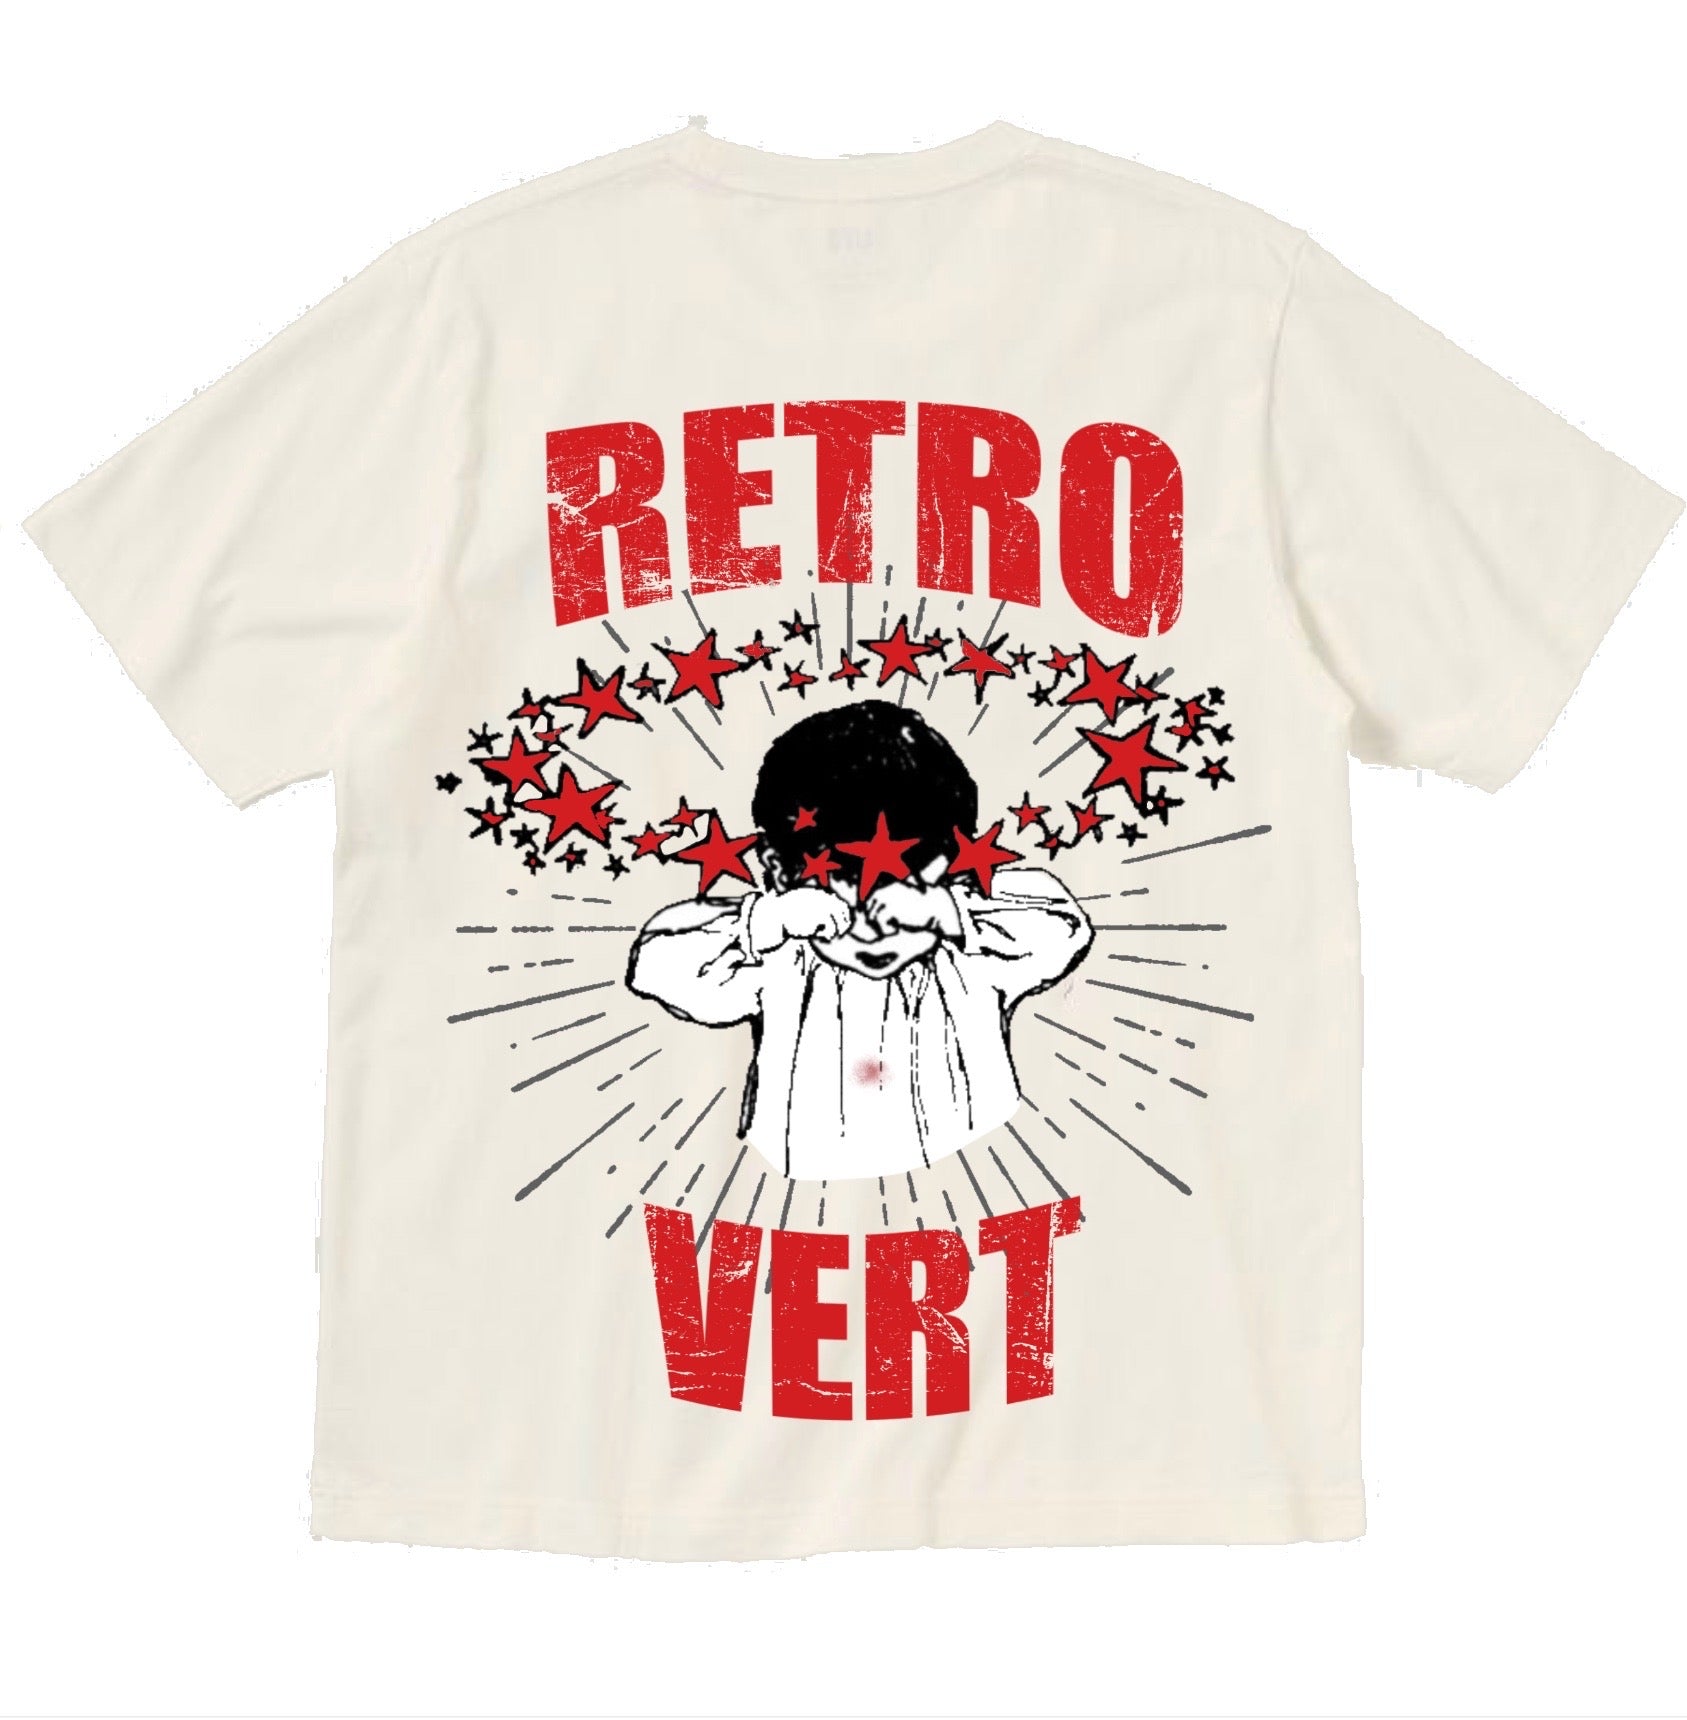 Retrovert Red Crybaby Tee